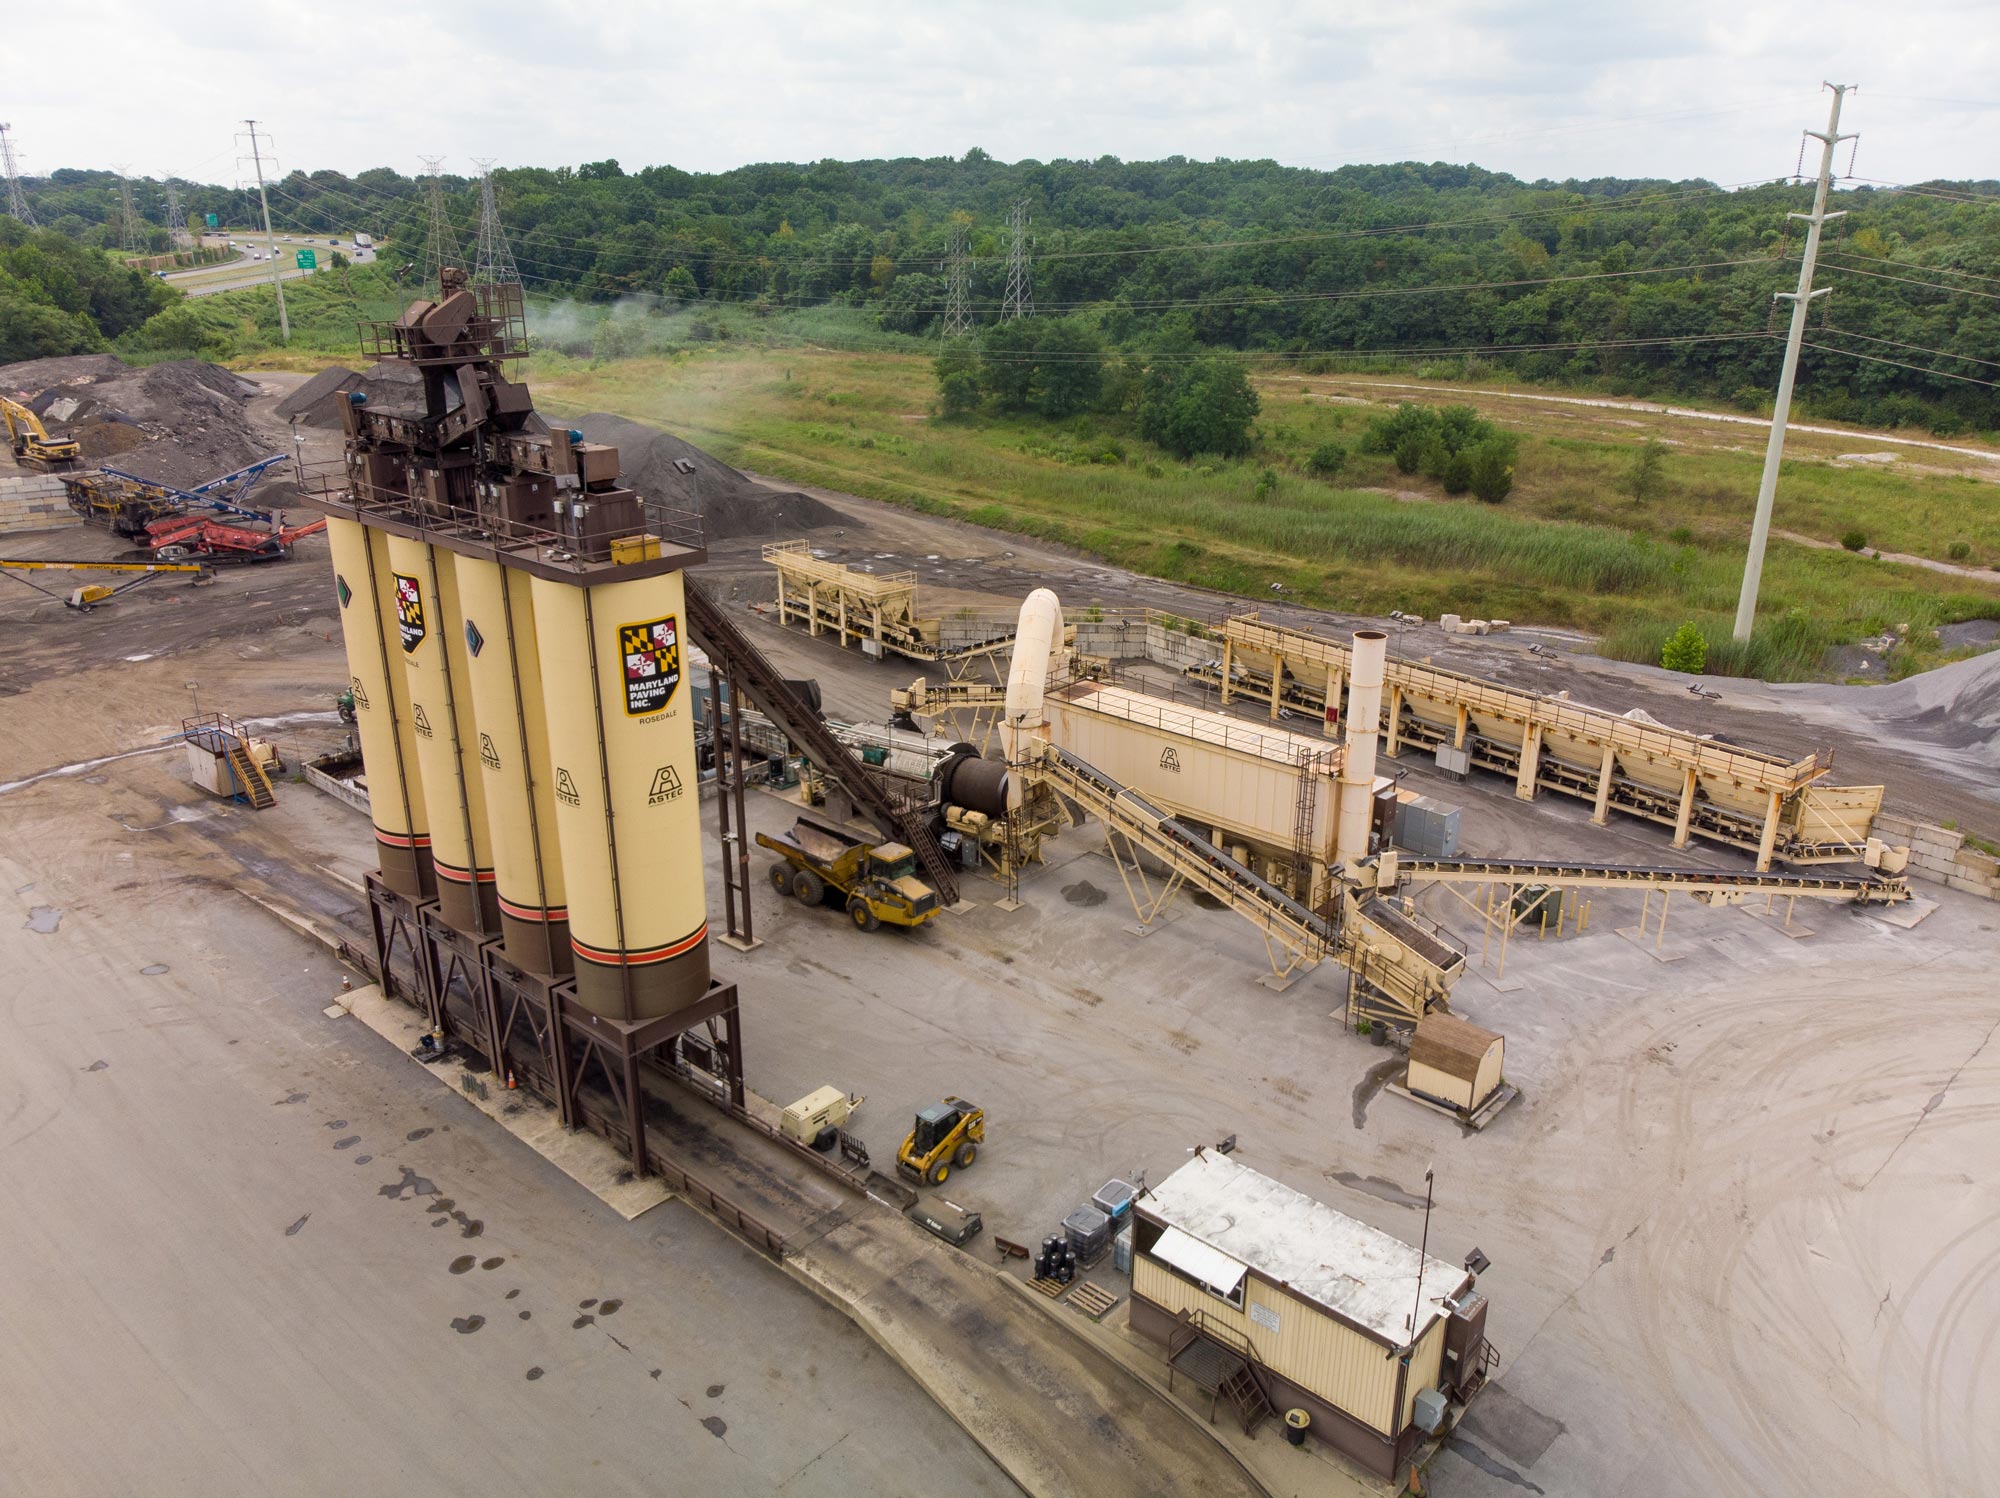 Large asphalt storage silos at a paving plant located in maryland, owned and operated by Gray & Son a leading site and development contractor in Maryland.